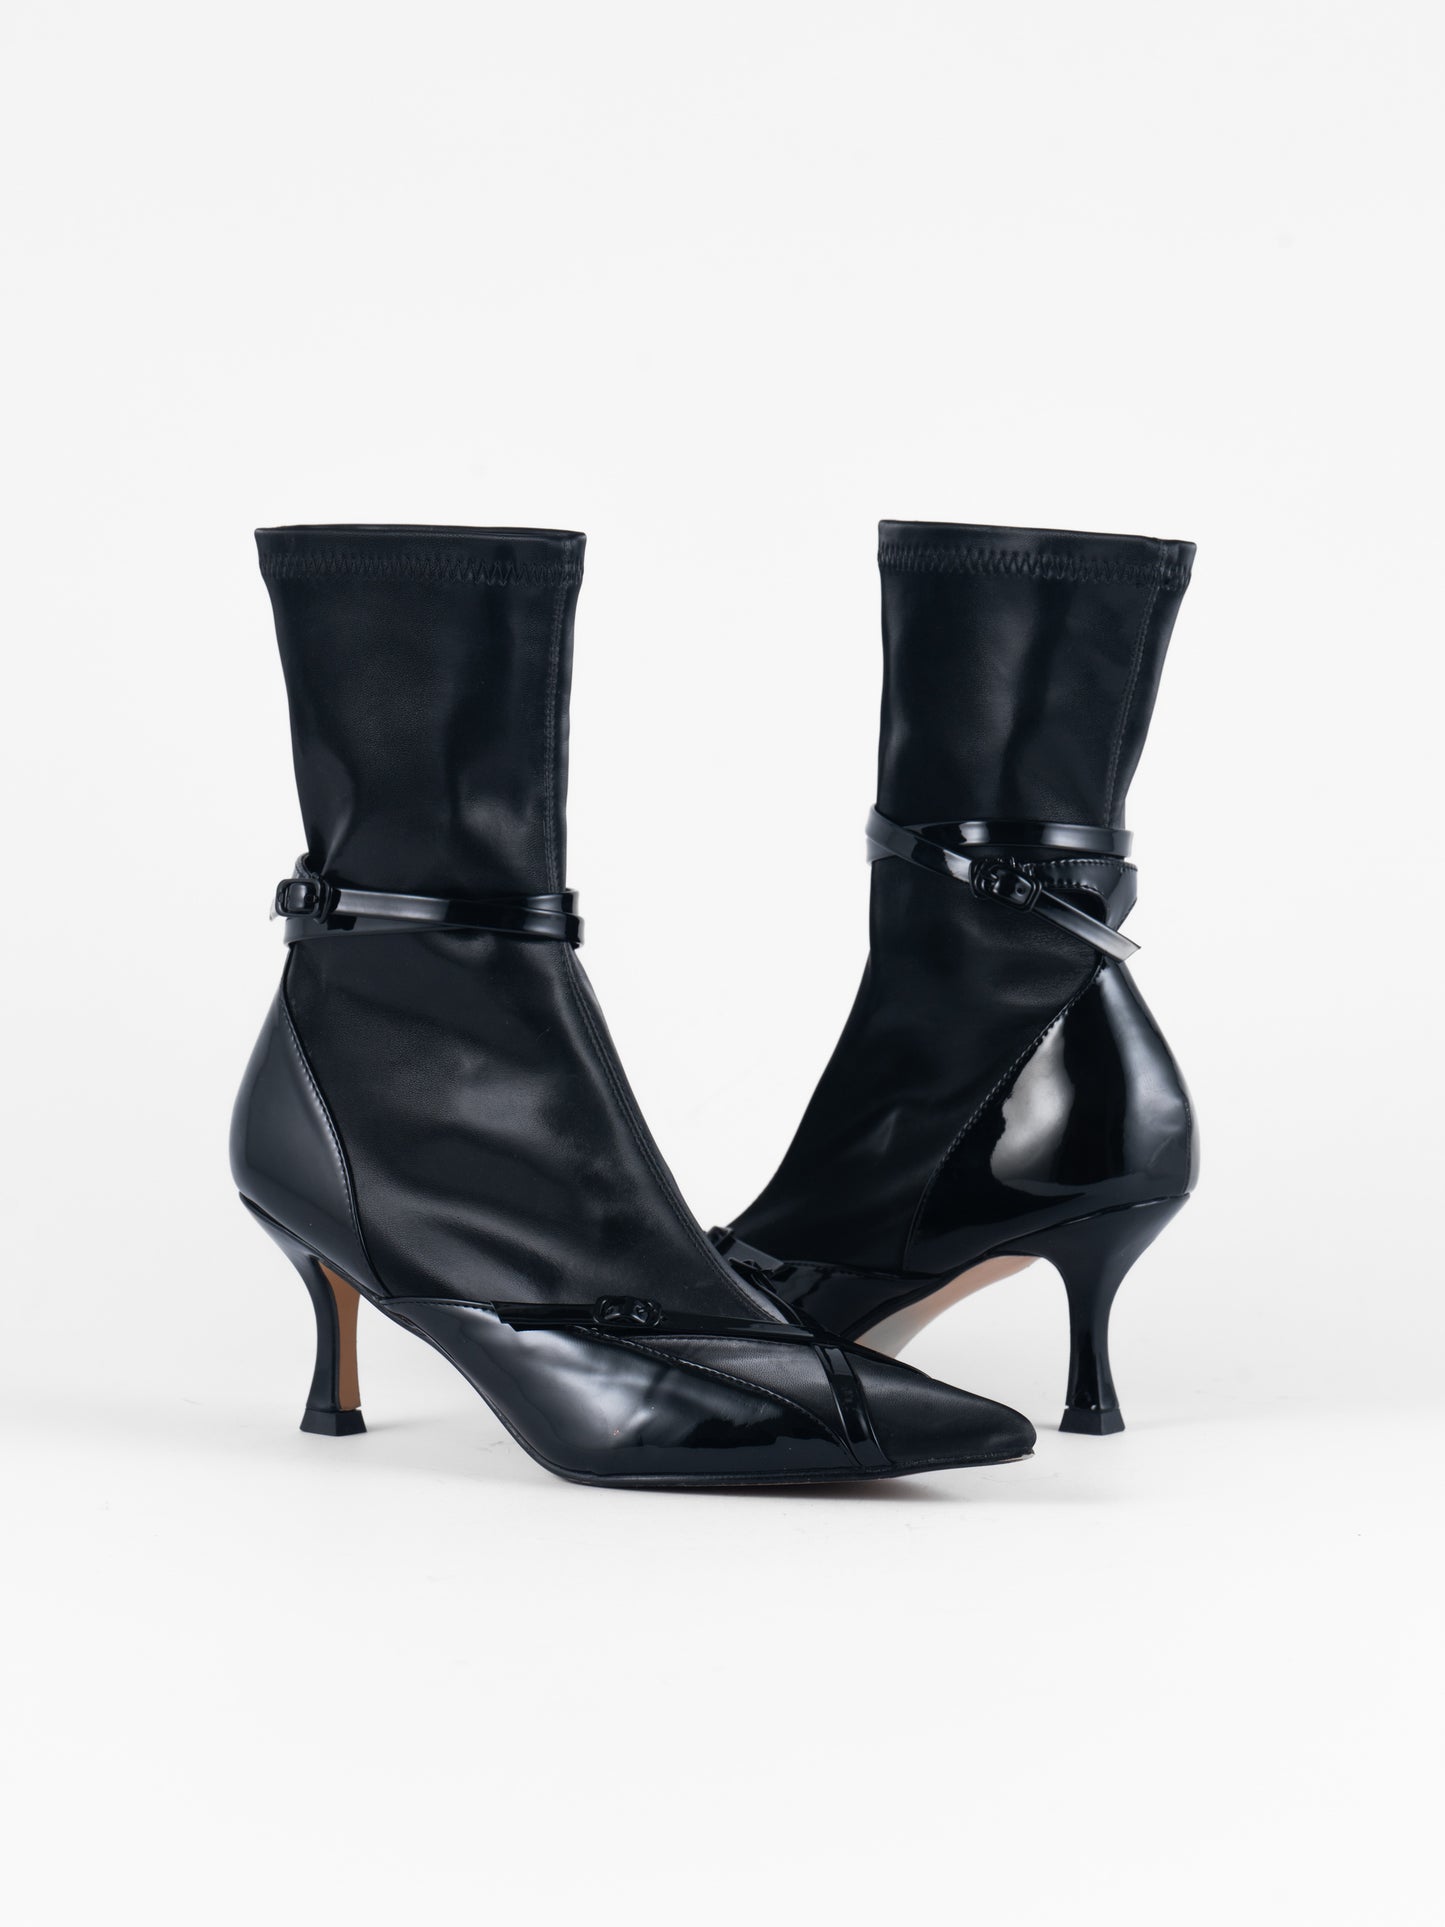 Warrior Ankle Boots - Black